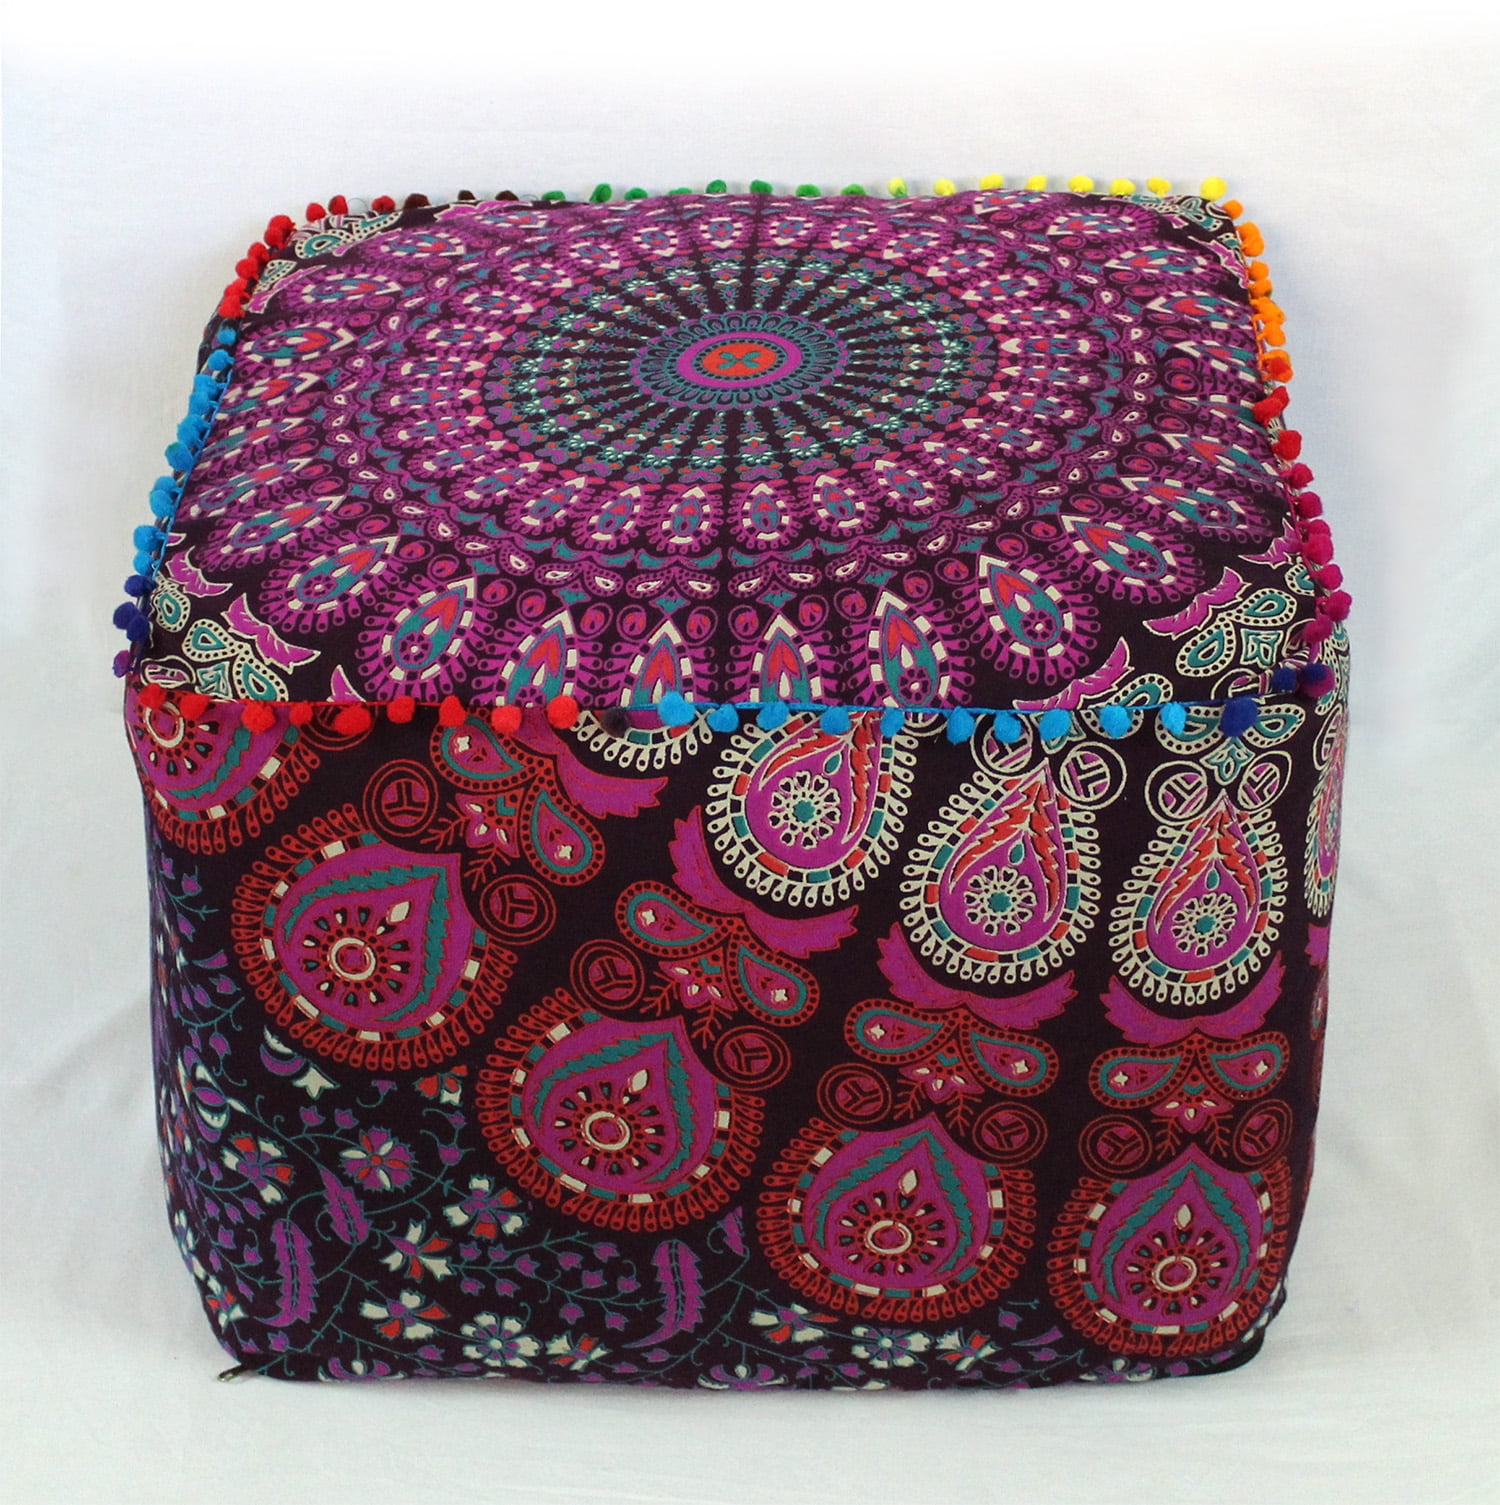 18" Indian Pink Patchwork Large Floor Ottoman Cushion Decorative Pillow Cover 